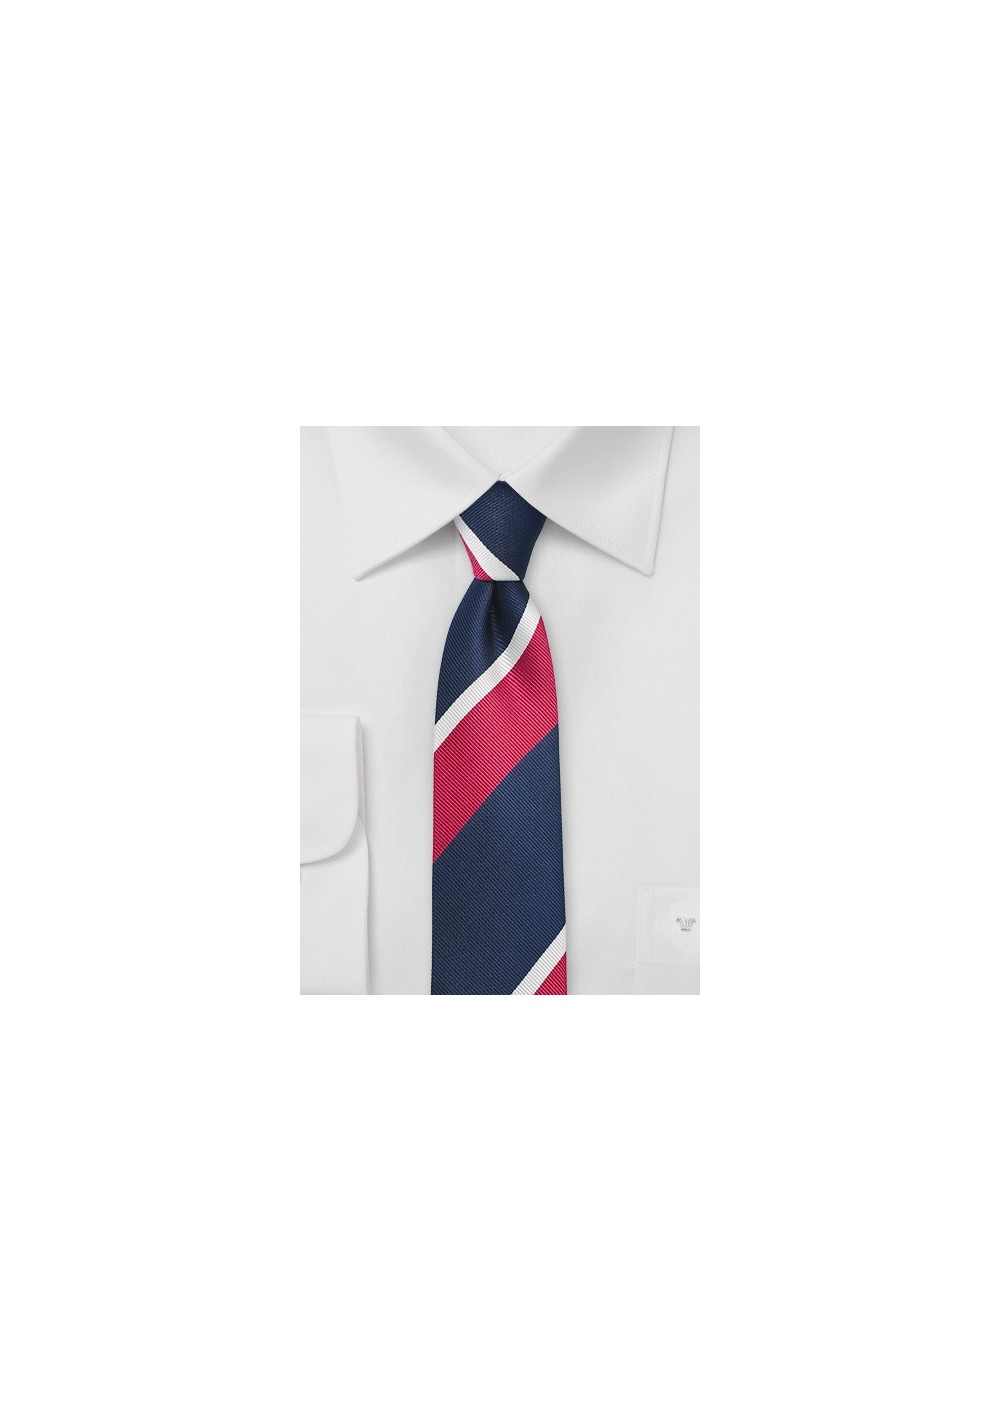 Narrow Striped Tie in Navy and Hot Pink